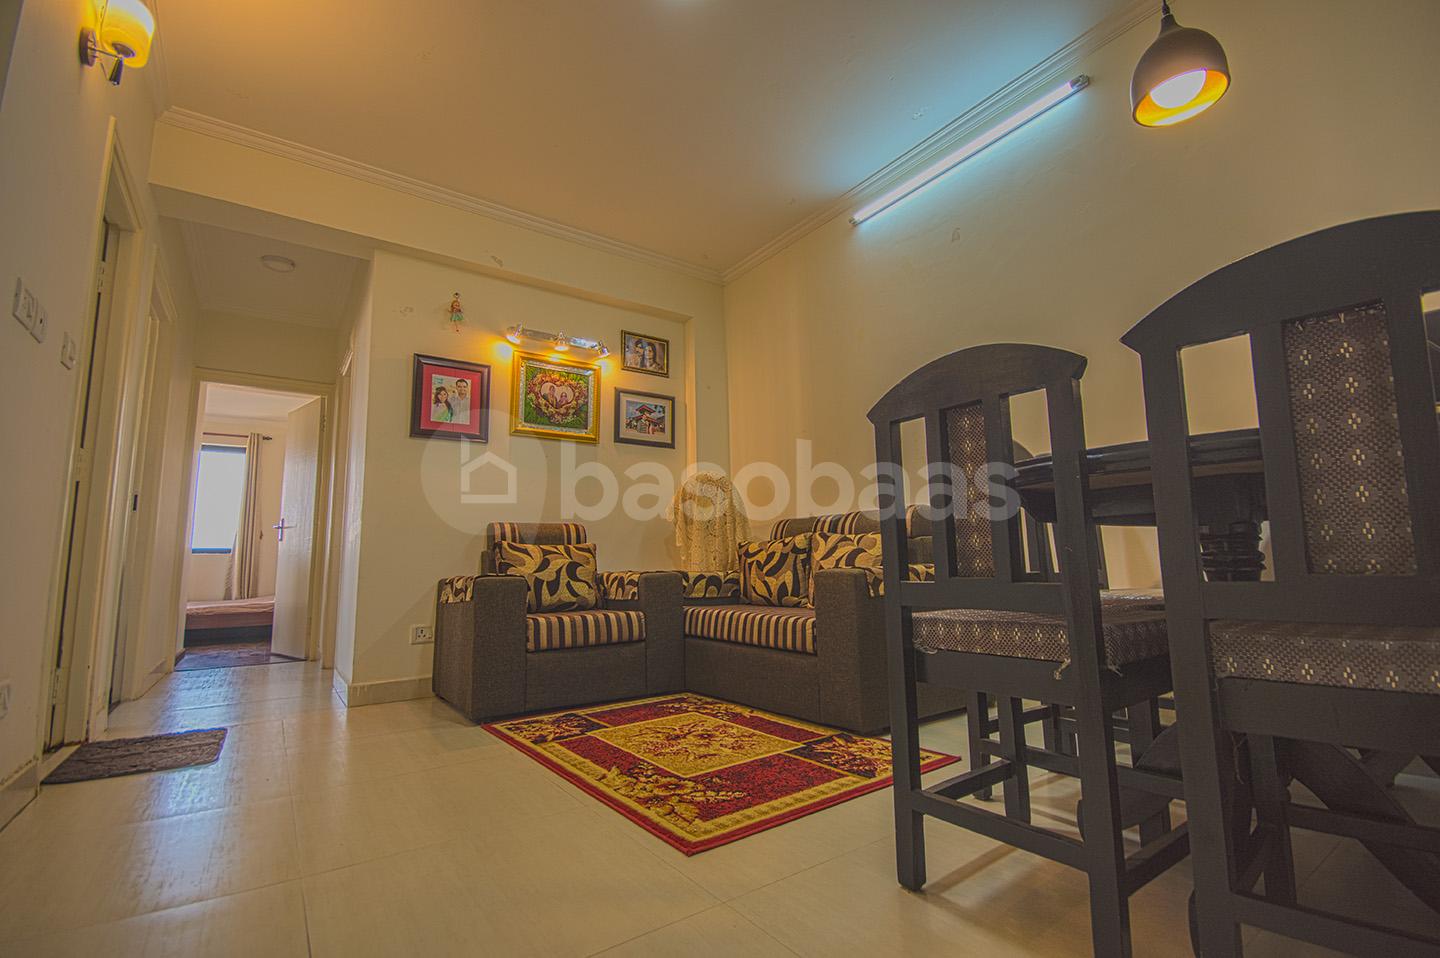 SOLD OUT: Apartment : Apartment for Sale in Jhamsikhel, Lalitpur Image 8